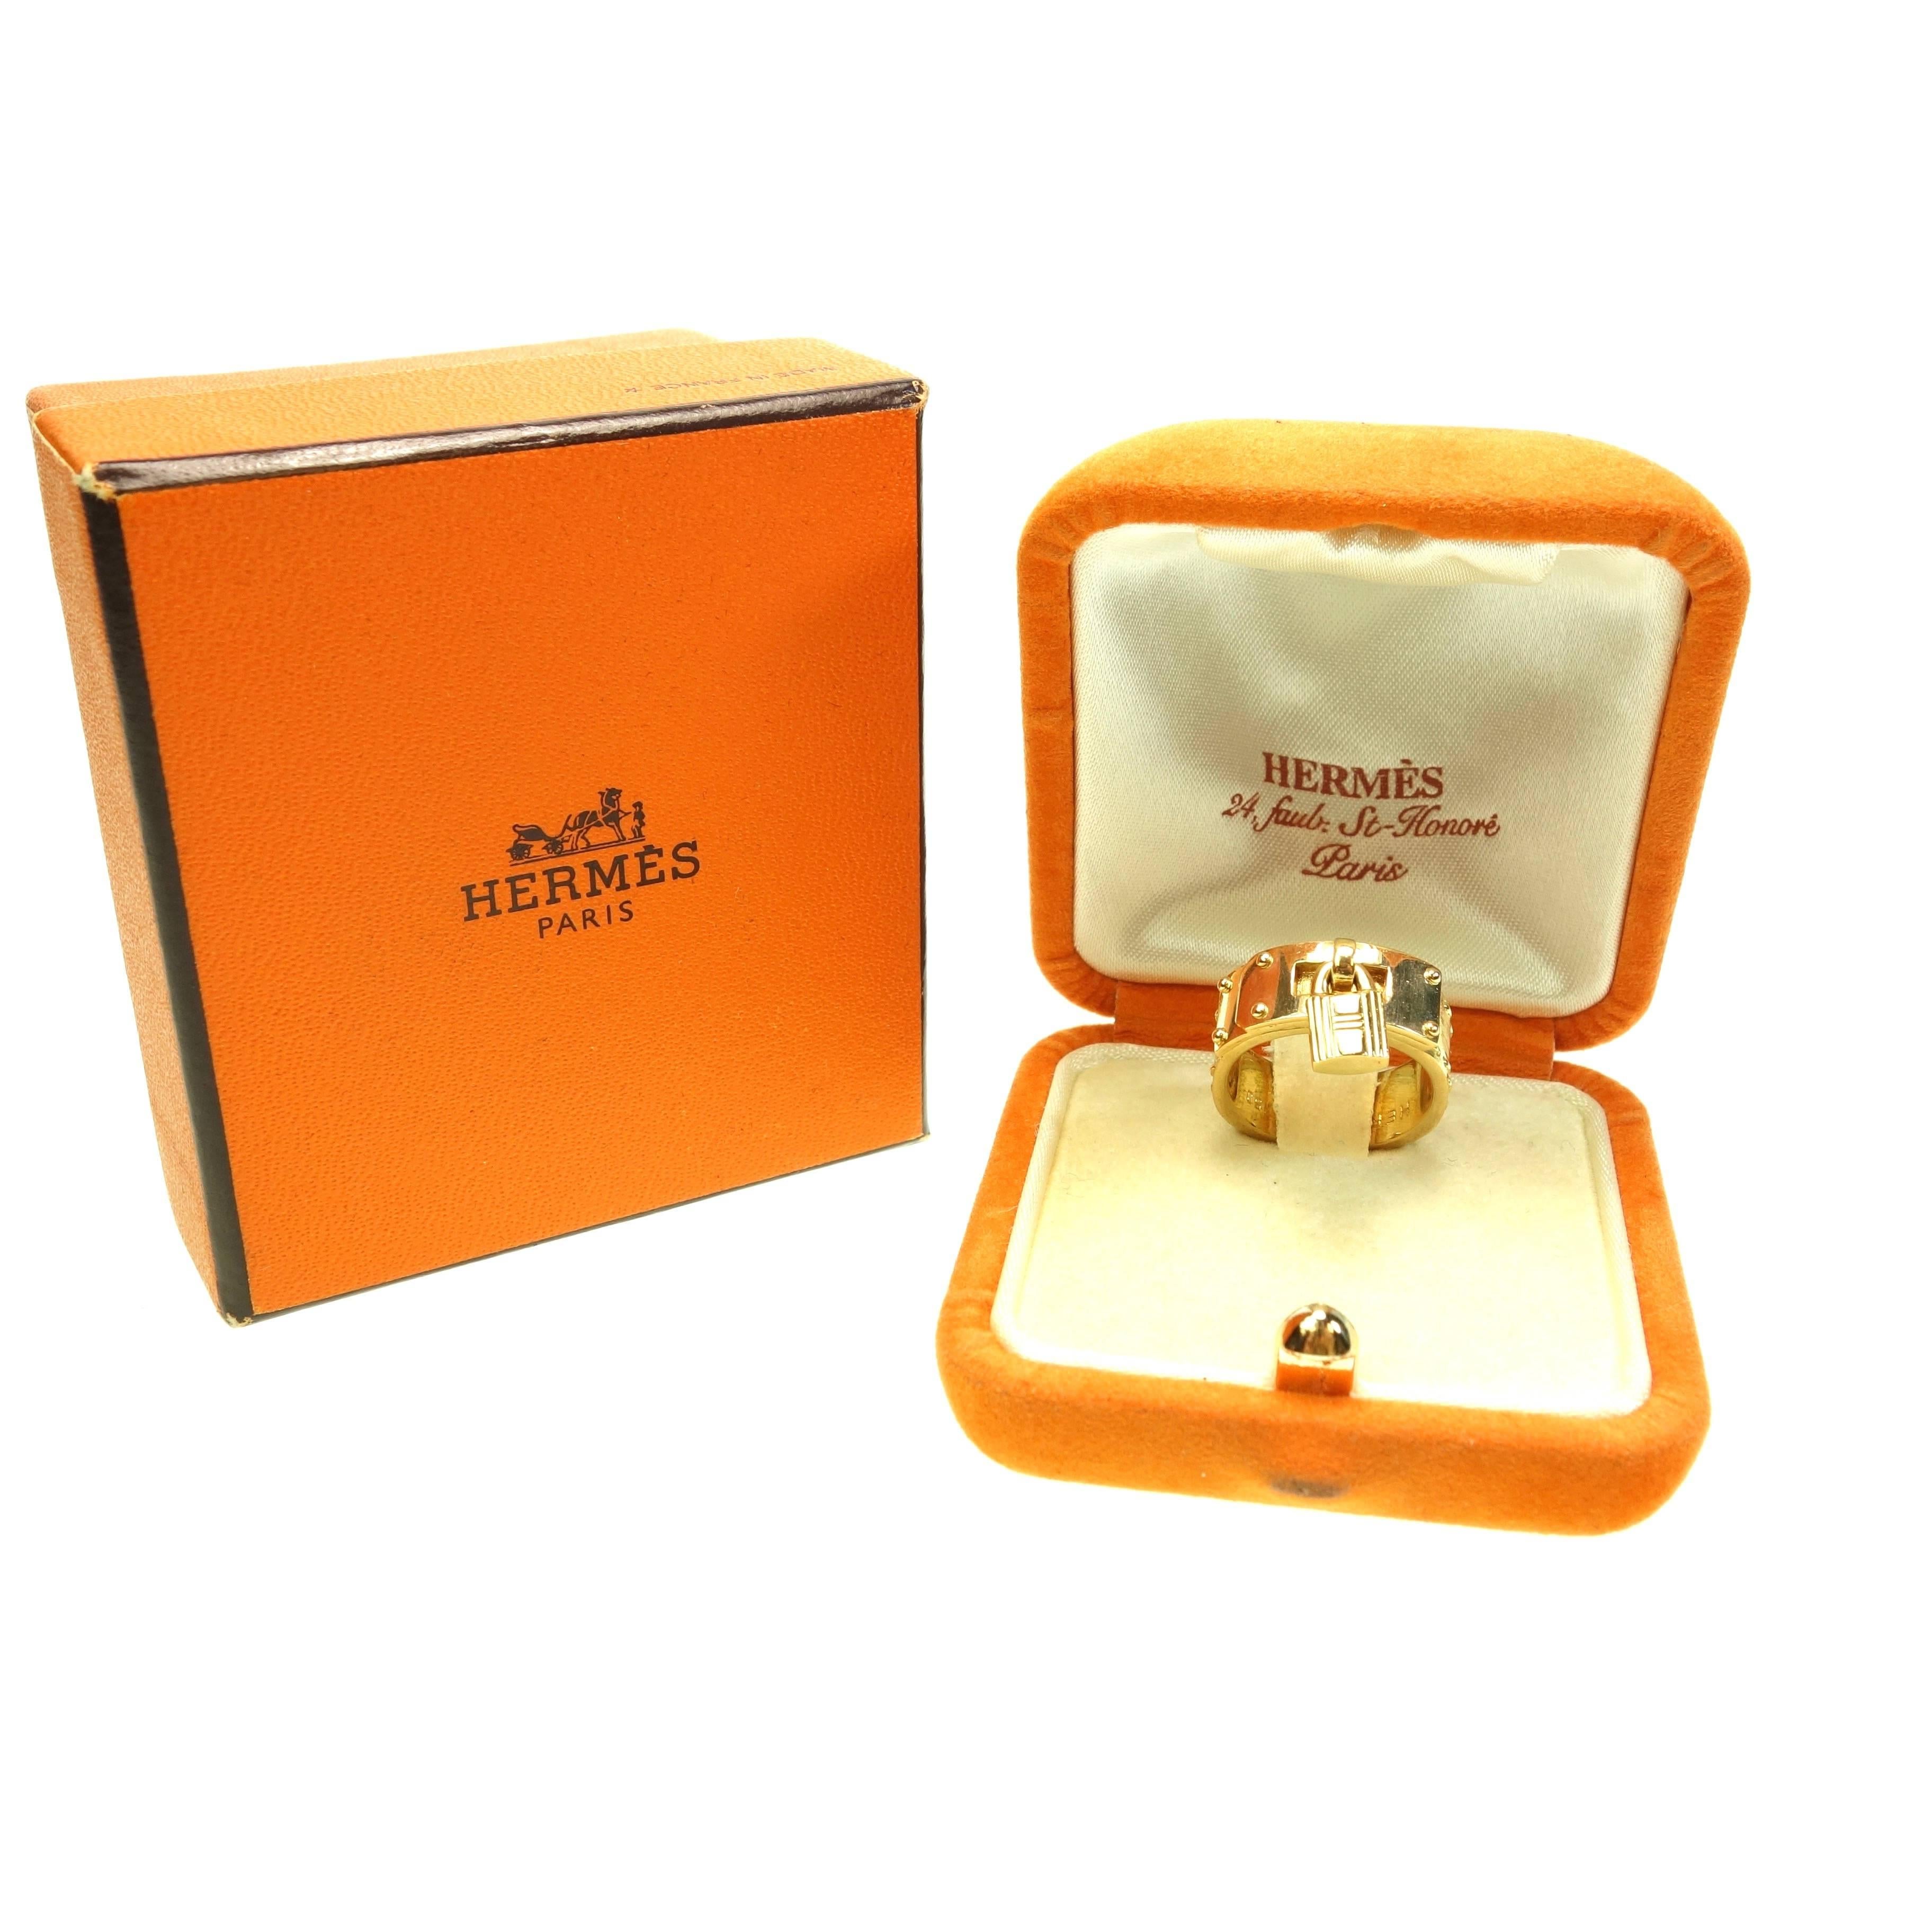 Crafted from solid 18kt yellow gold in a polished and satin finish from Hermes famous 